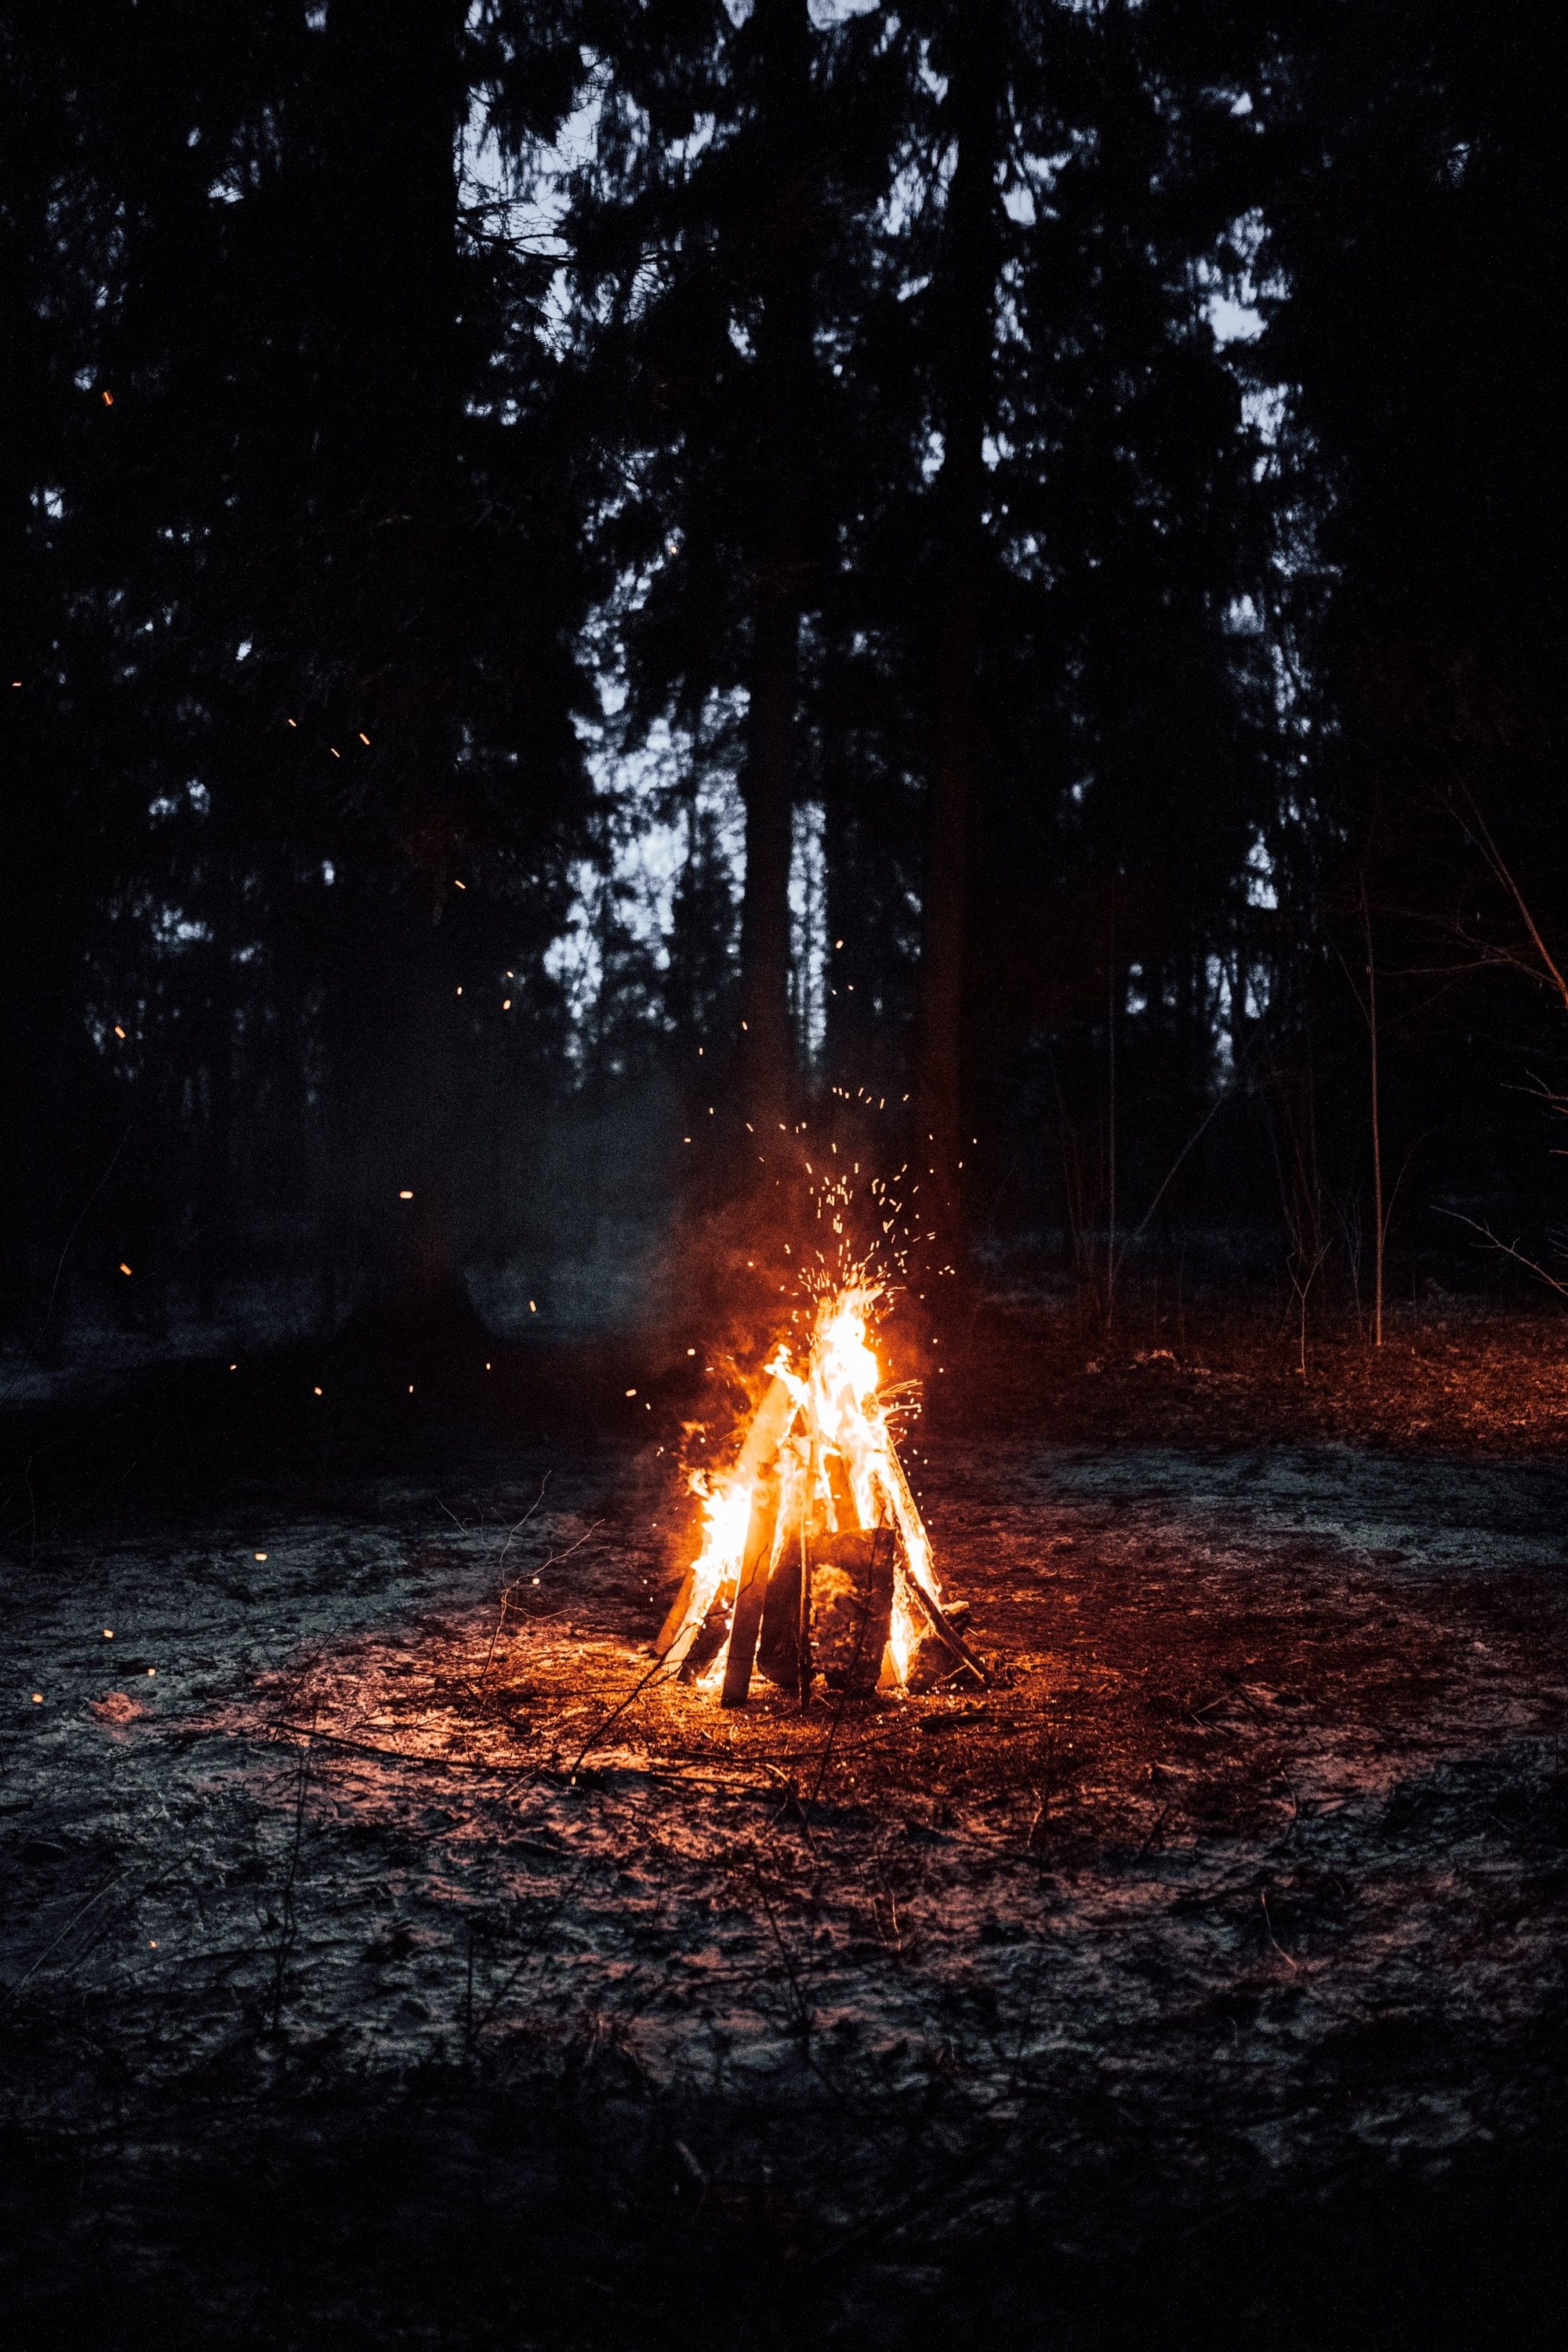 A fire is burning in the middle of some trees - Camping